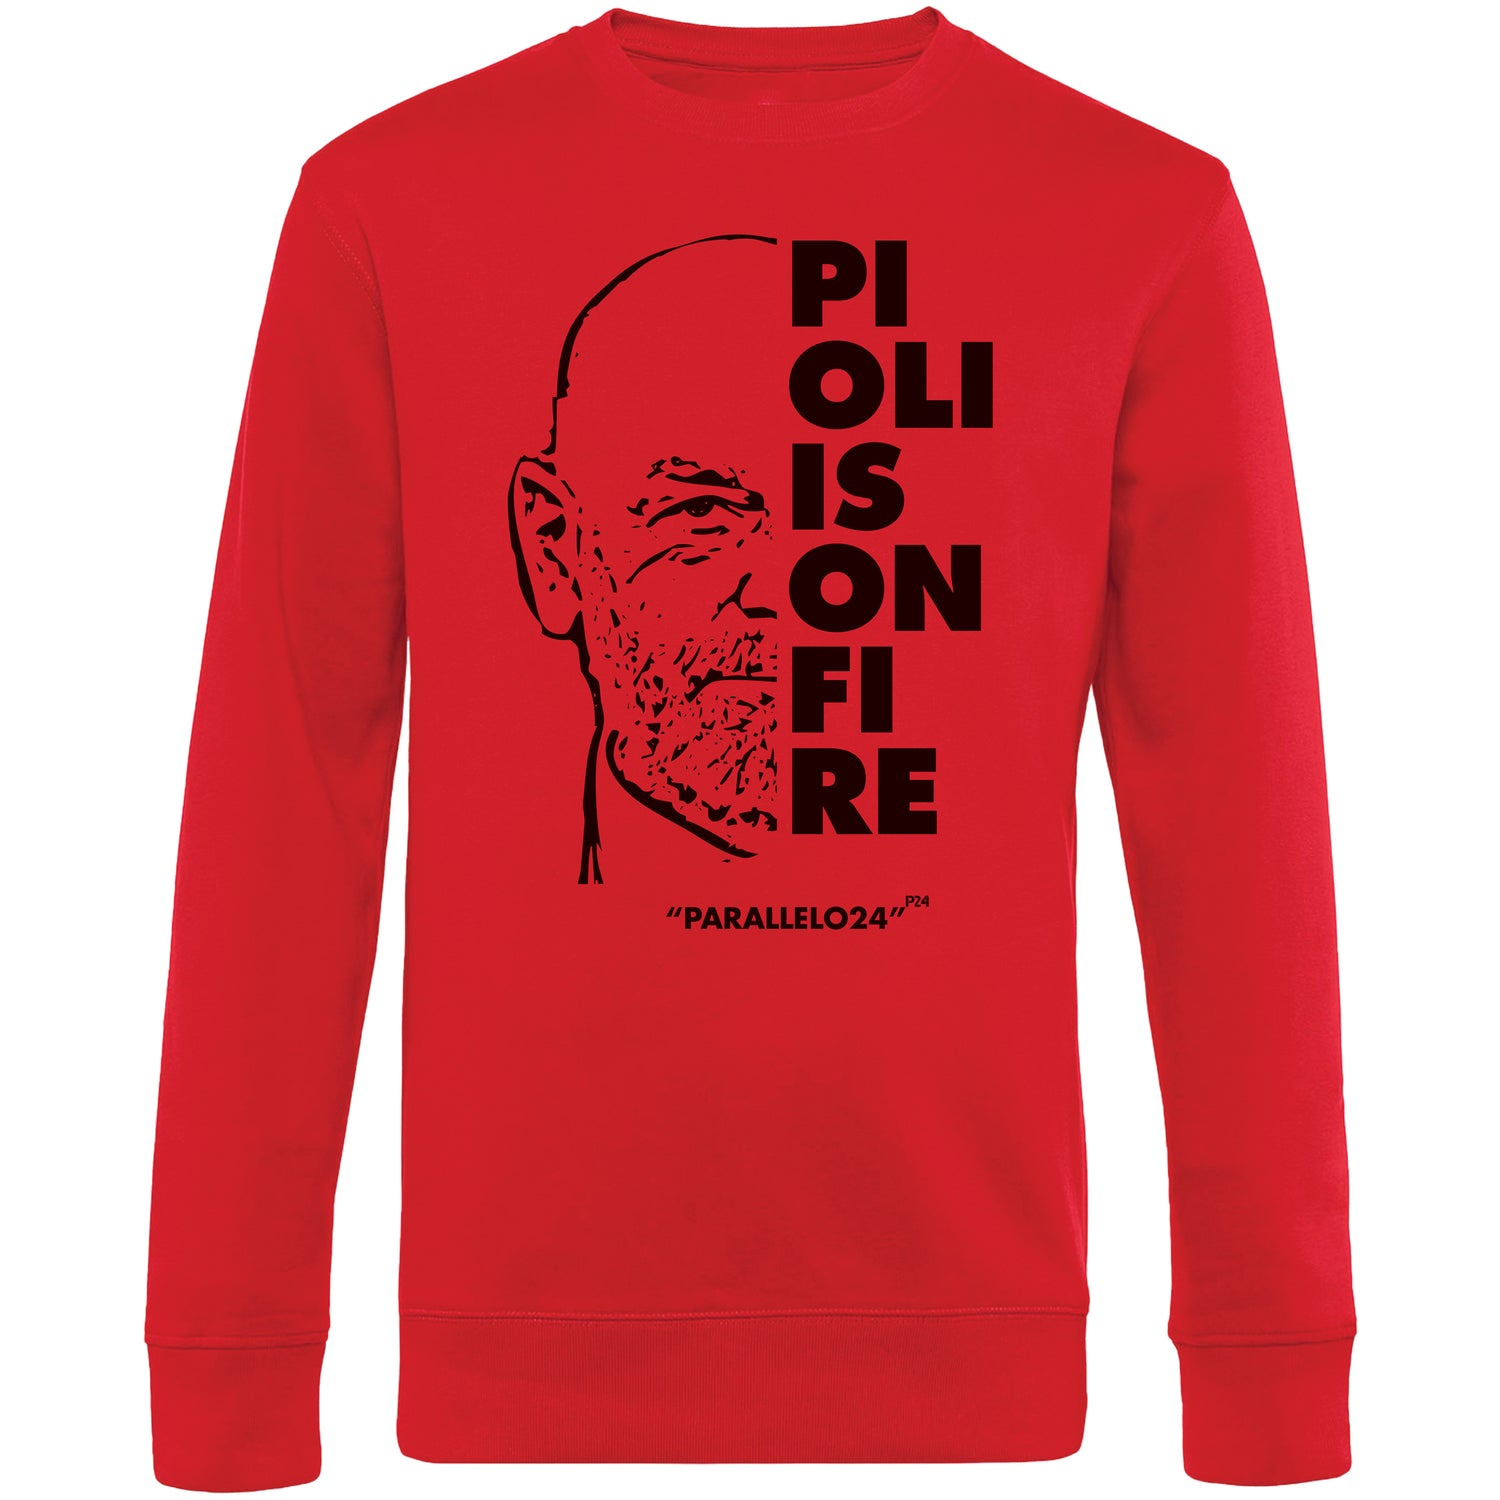 "Pioli is on fire" Parallelo24